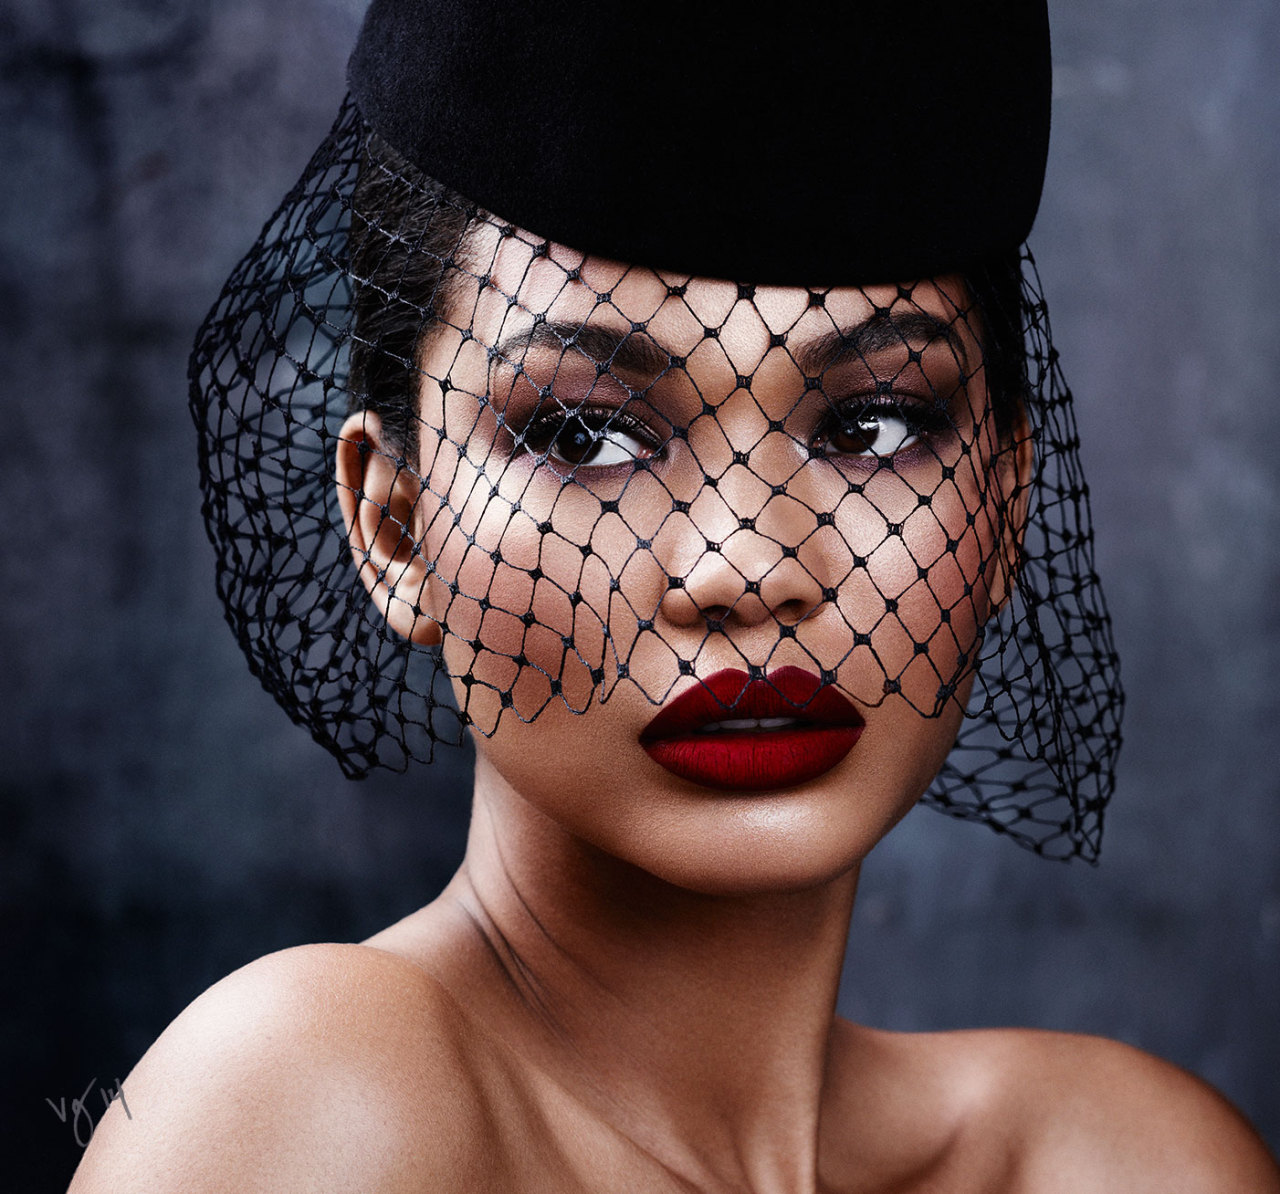 pumpkinspice13:  hall70:  imgmodels:  Chanel Iman photographed by Ben Hassett for